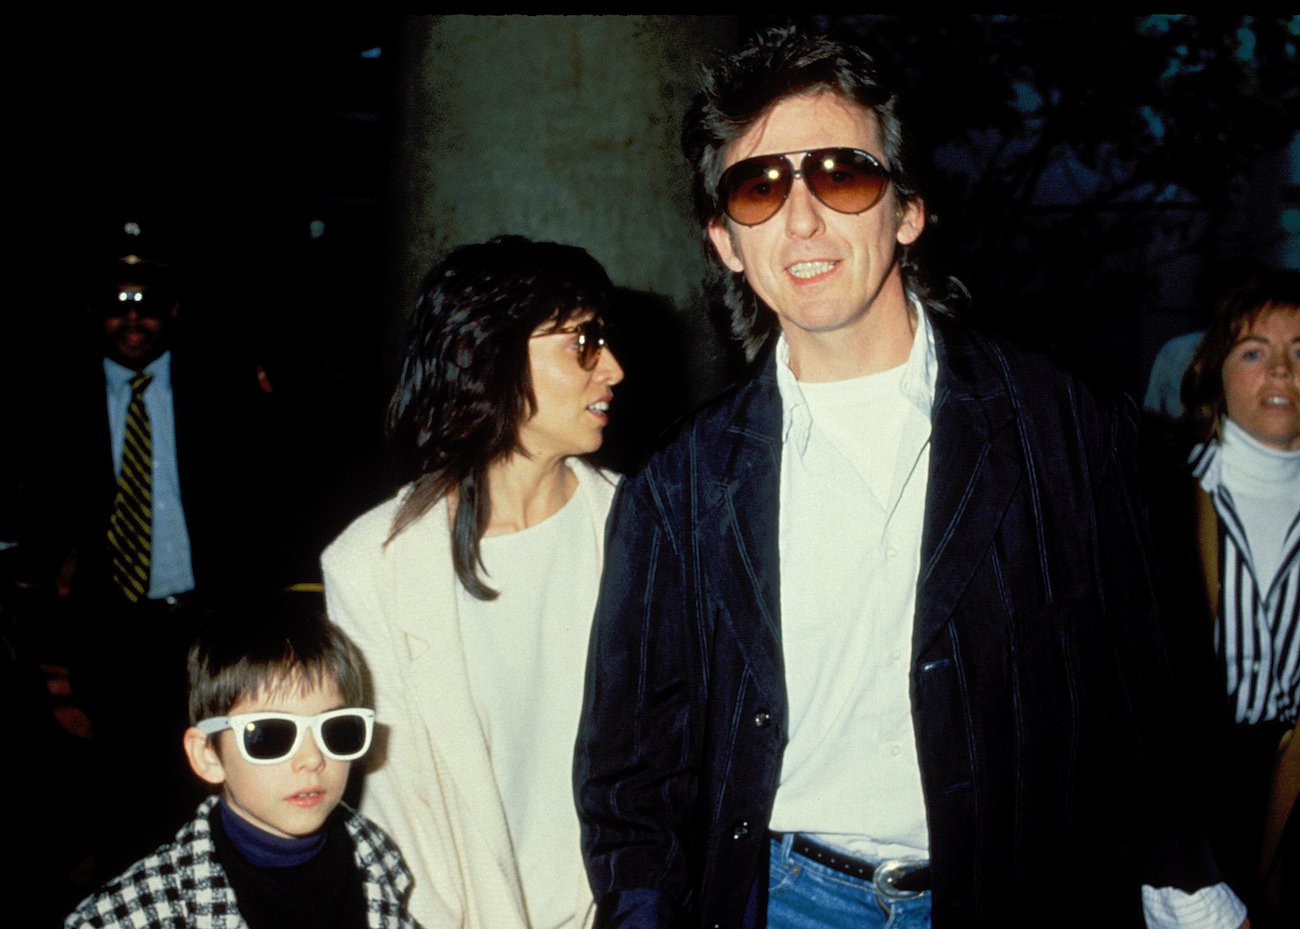 George Harrison, his wife, Olivia, and their son, Dhani, at LAX Airport, 1998.